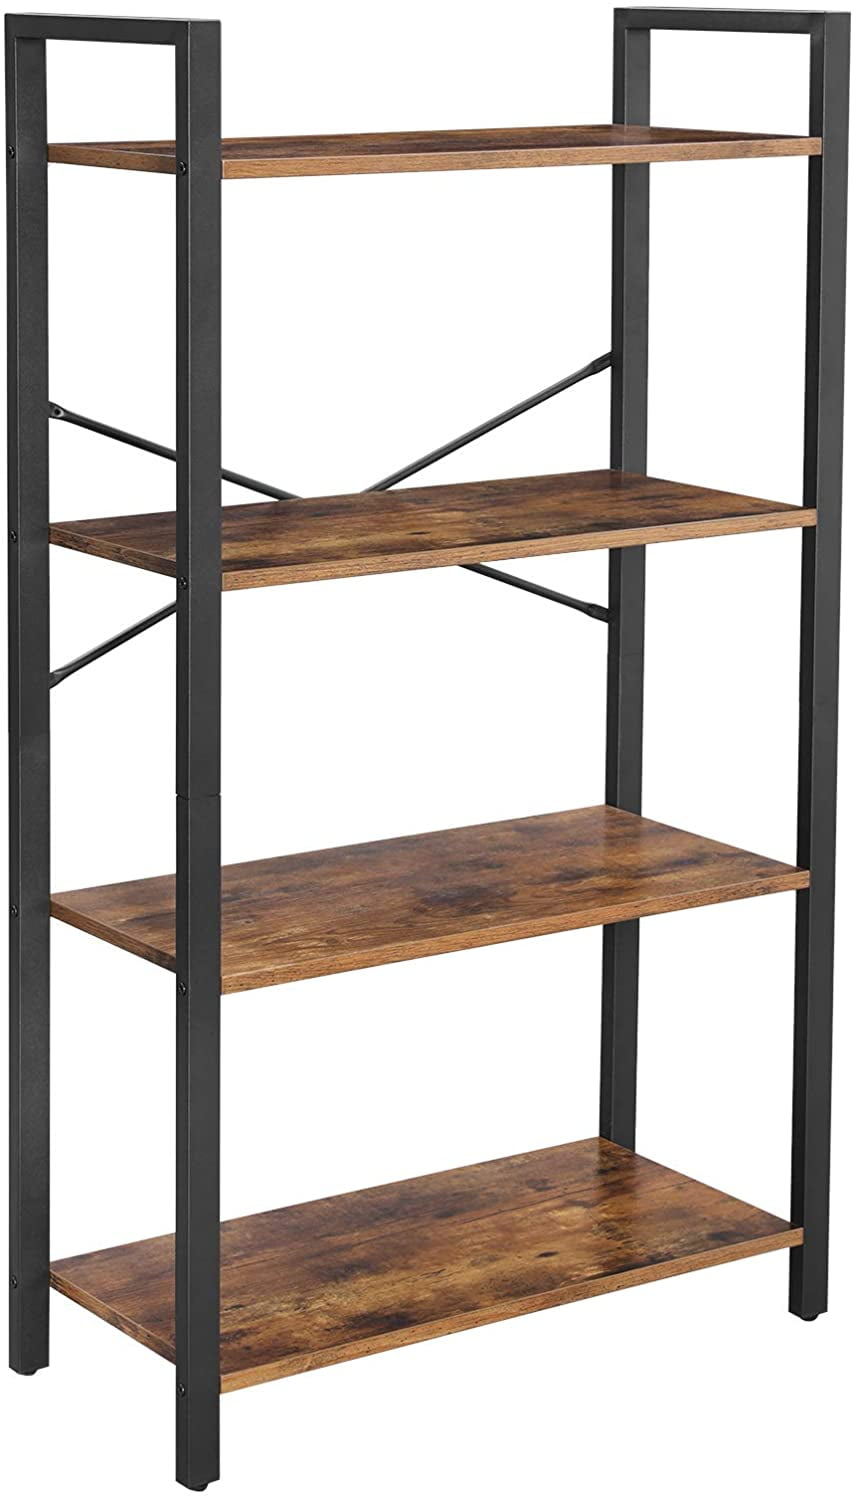 Easy Assembly Rustic Dark Brown ULLS88BF VASAGLE Industrial Folding Bookshelf with Metal Frame Multifunctional Shelving Unit 4-Tier Bookcase 